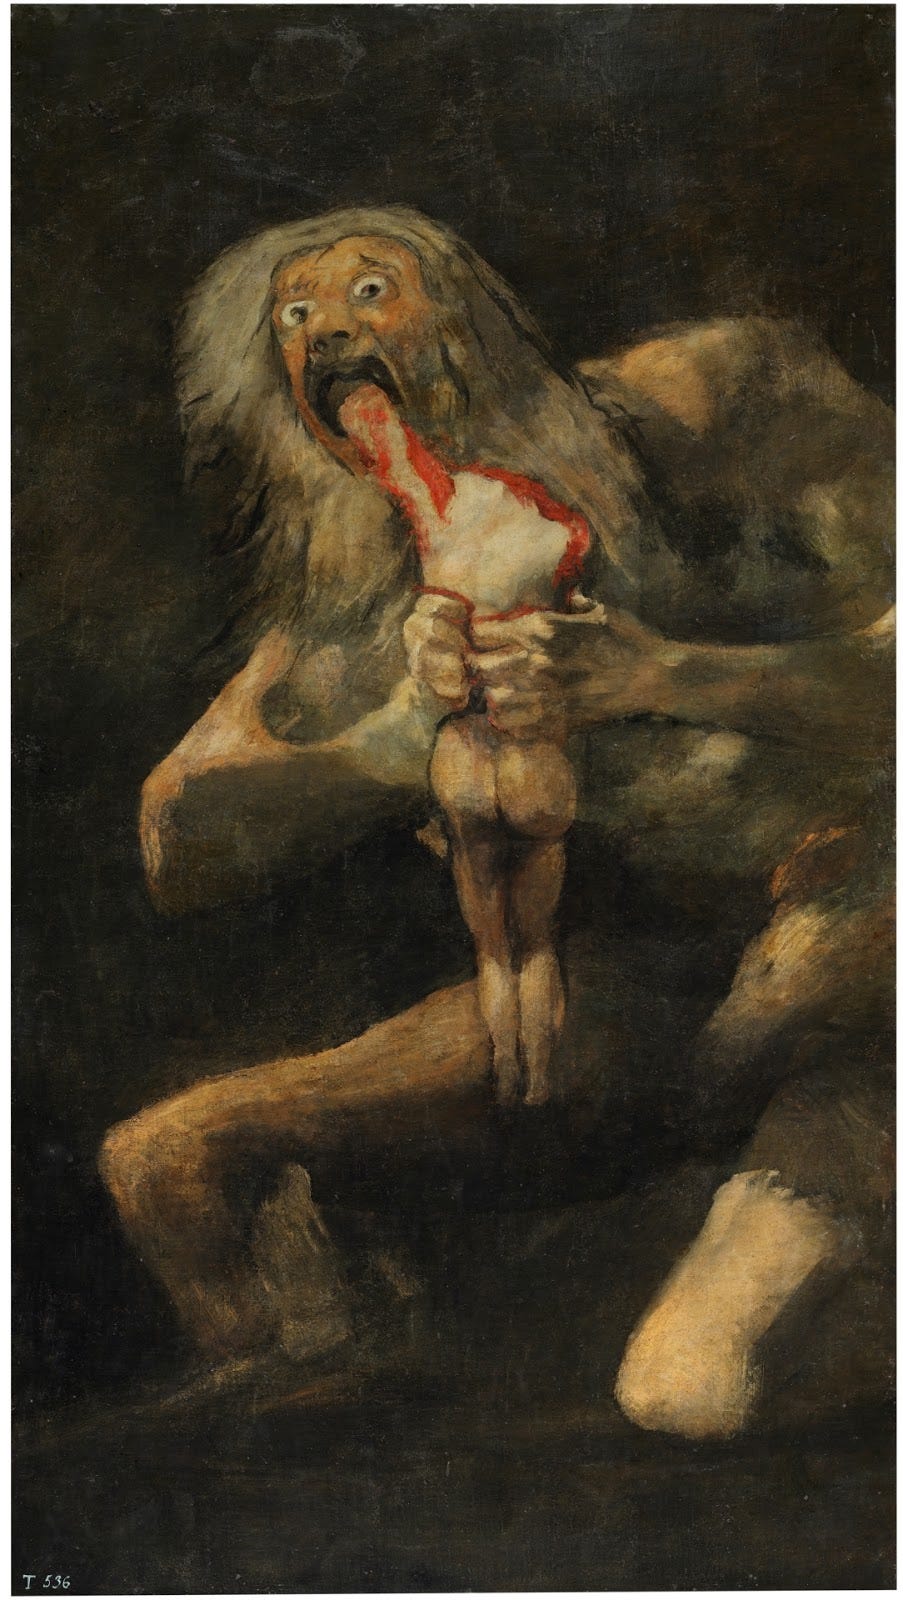 The Madness within Goya: Making Sense of Saturn Devouring his Son | by  Karan Trichal | Medium